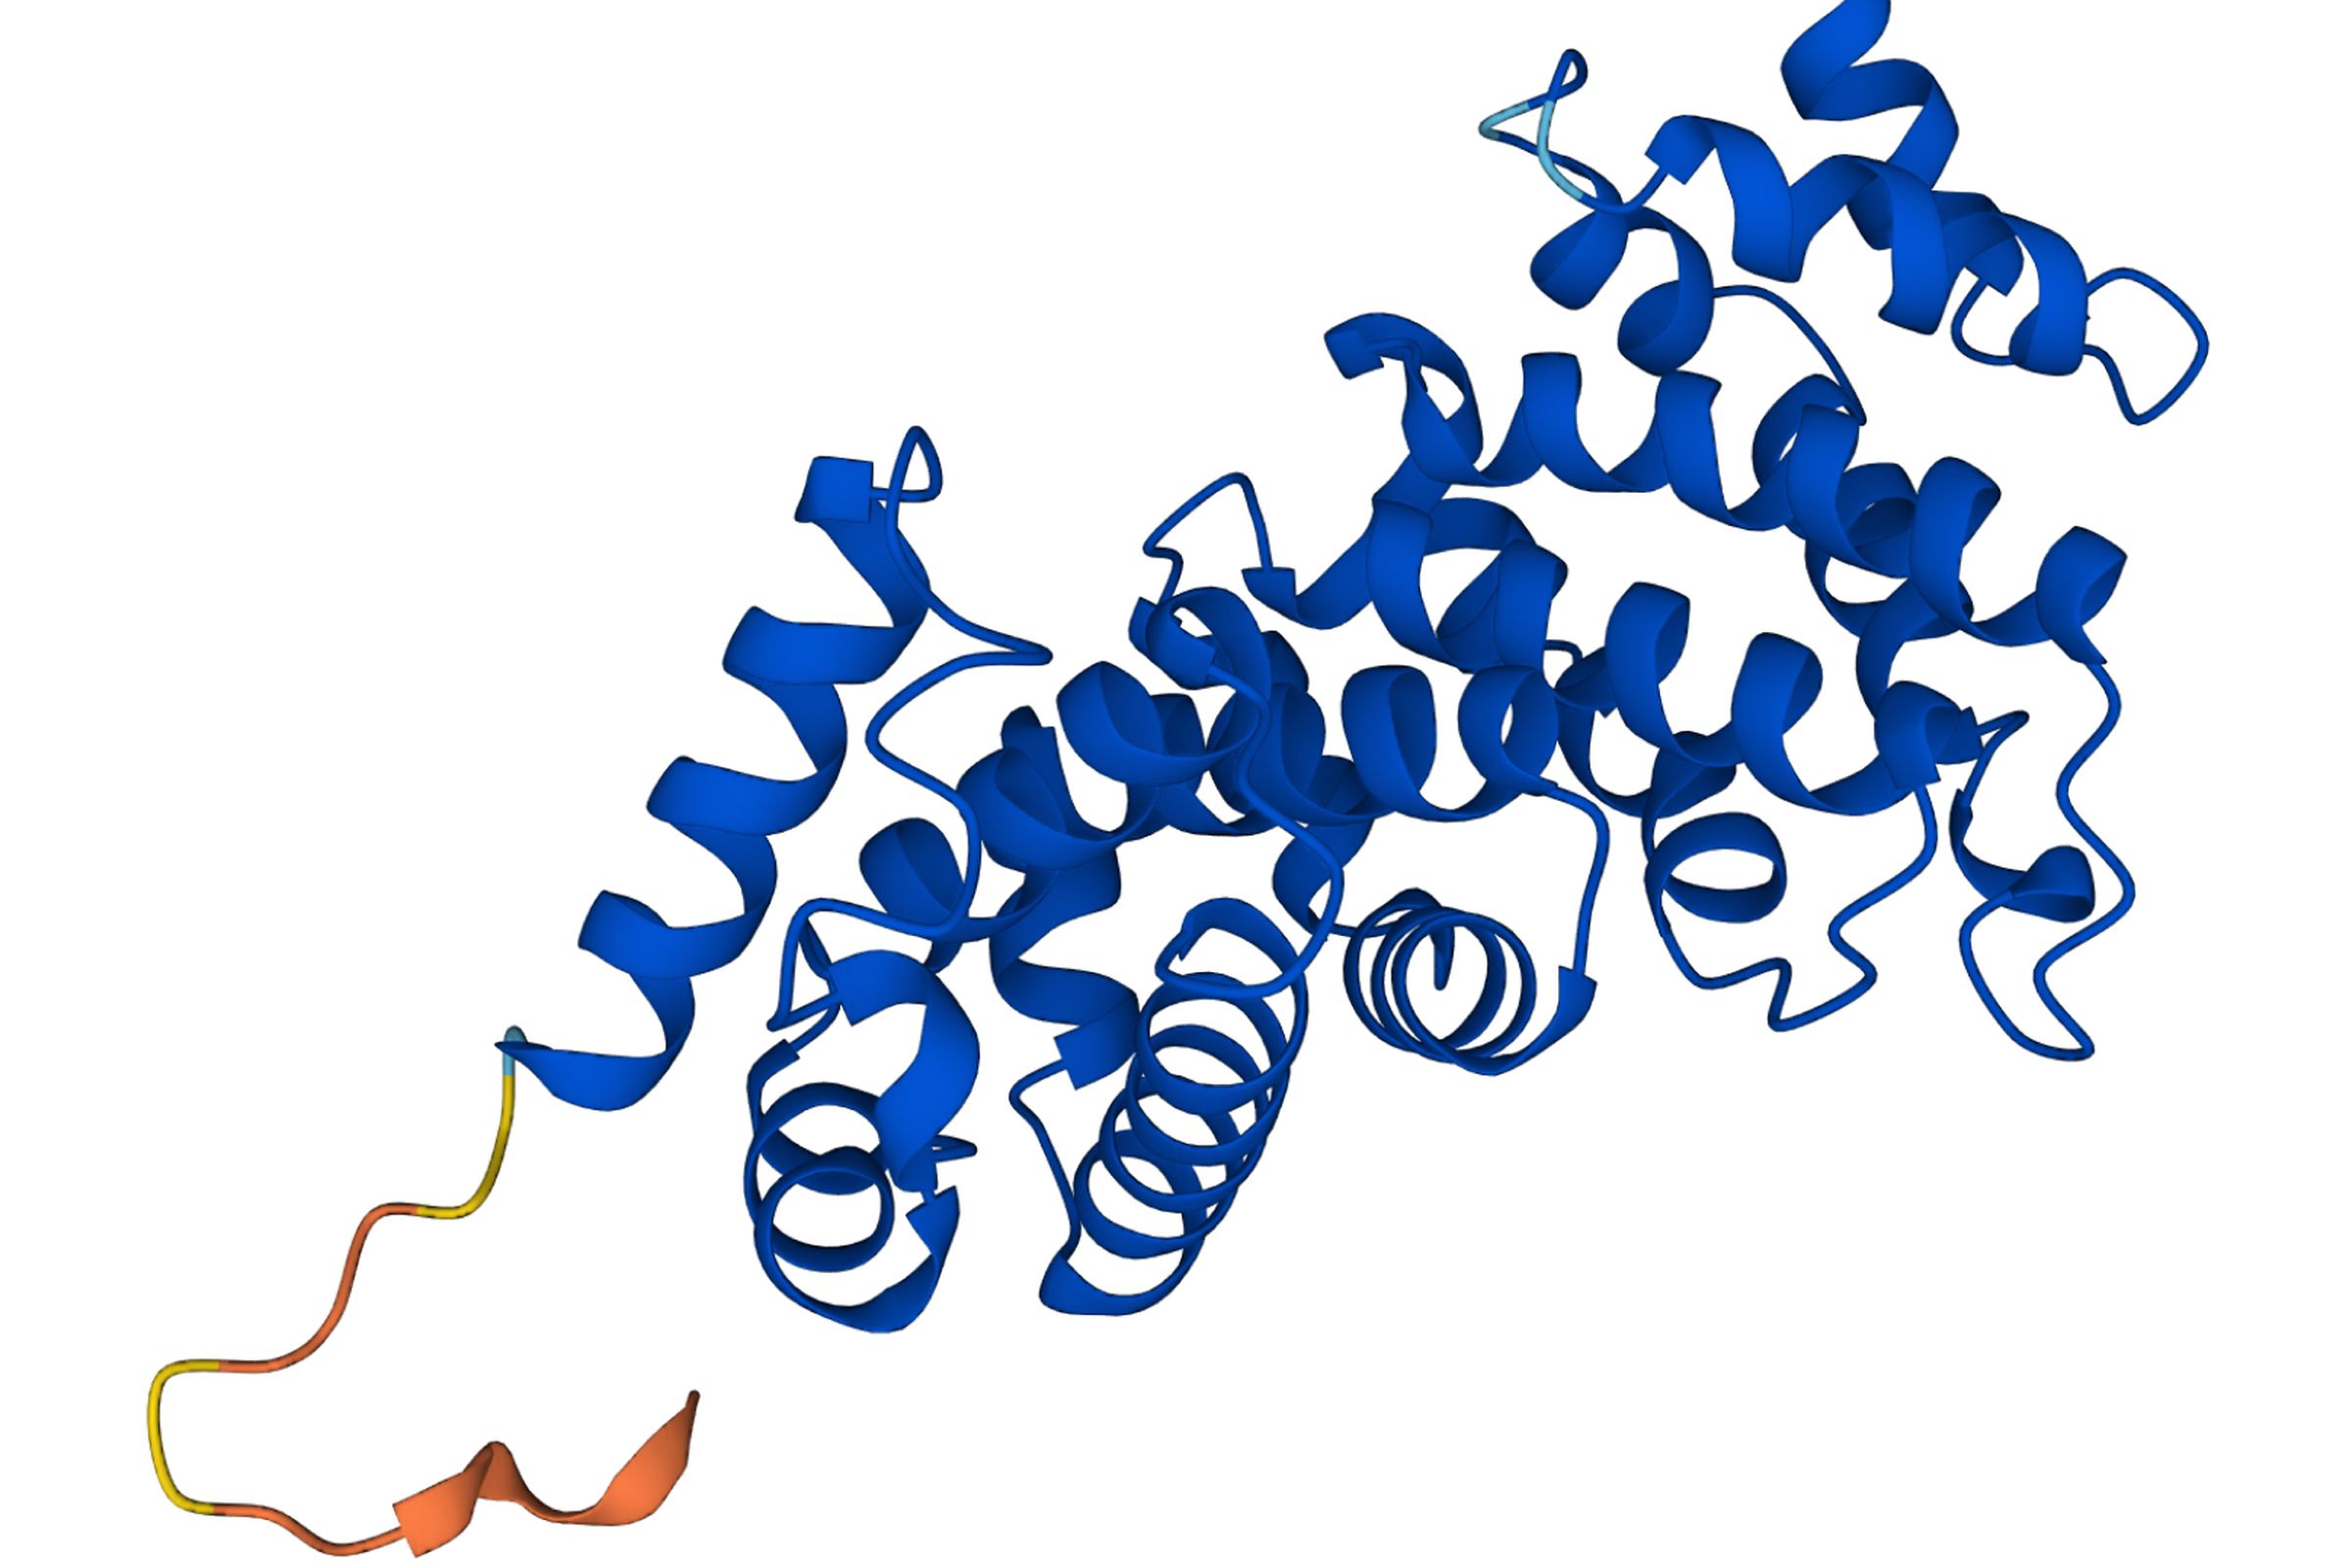 A protein structure identified by AlphaFold.